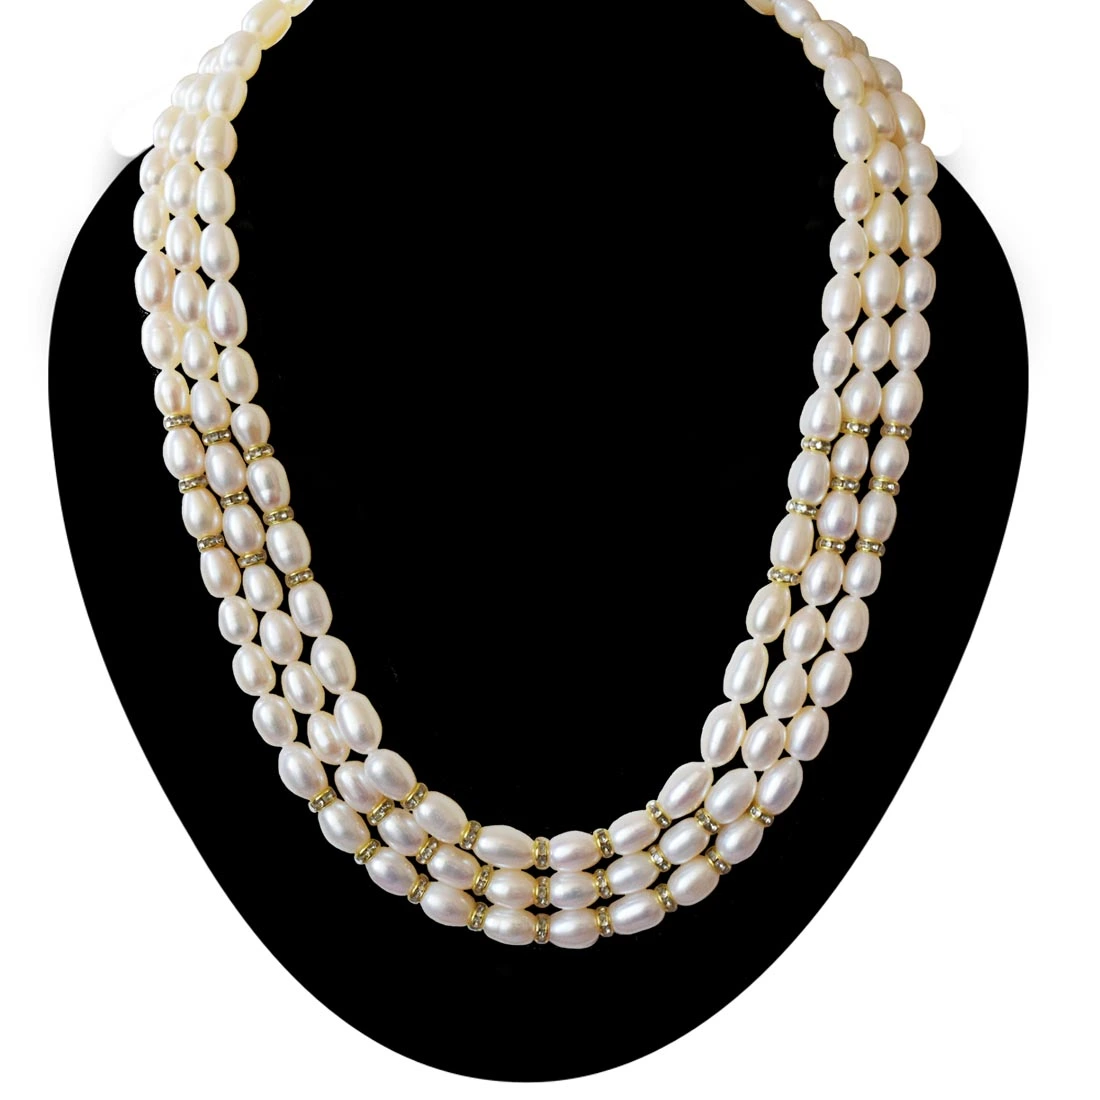 3 Line Real Big Elongated Pearl and Stone Ring Necklace for Women (SN1032)